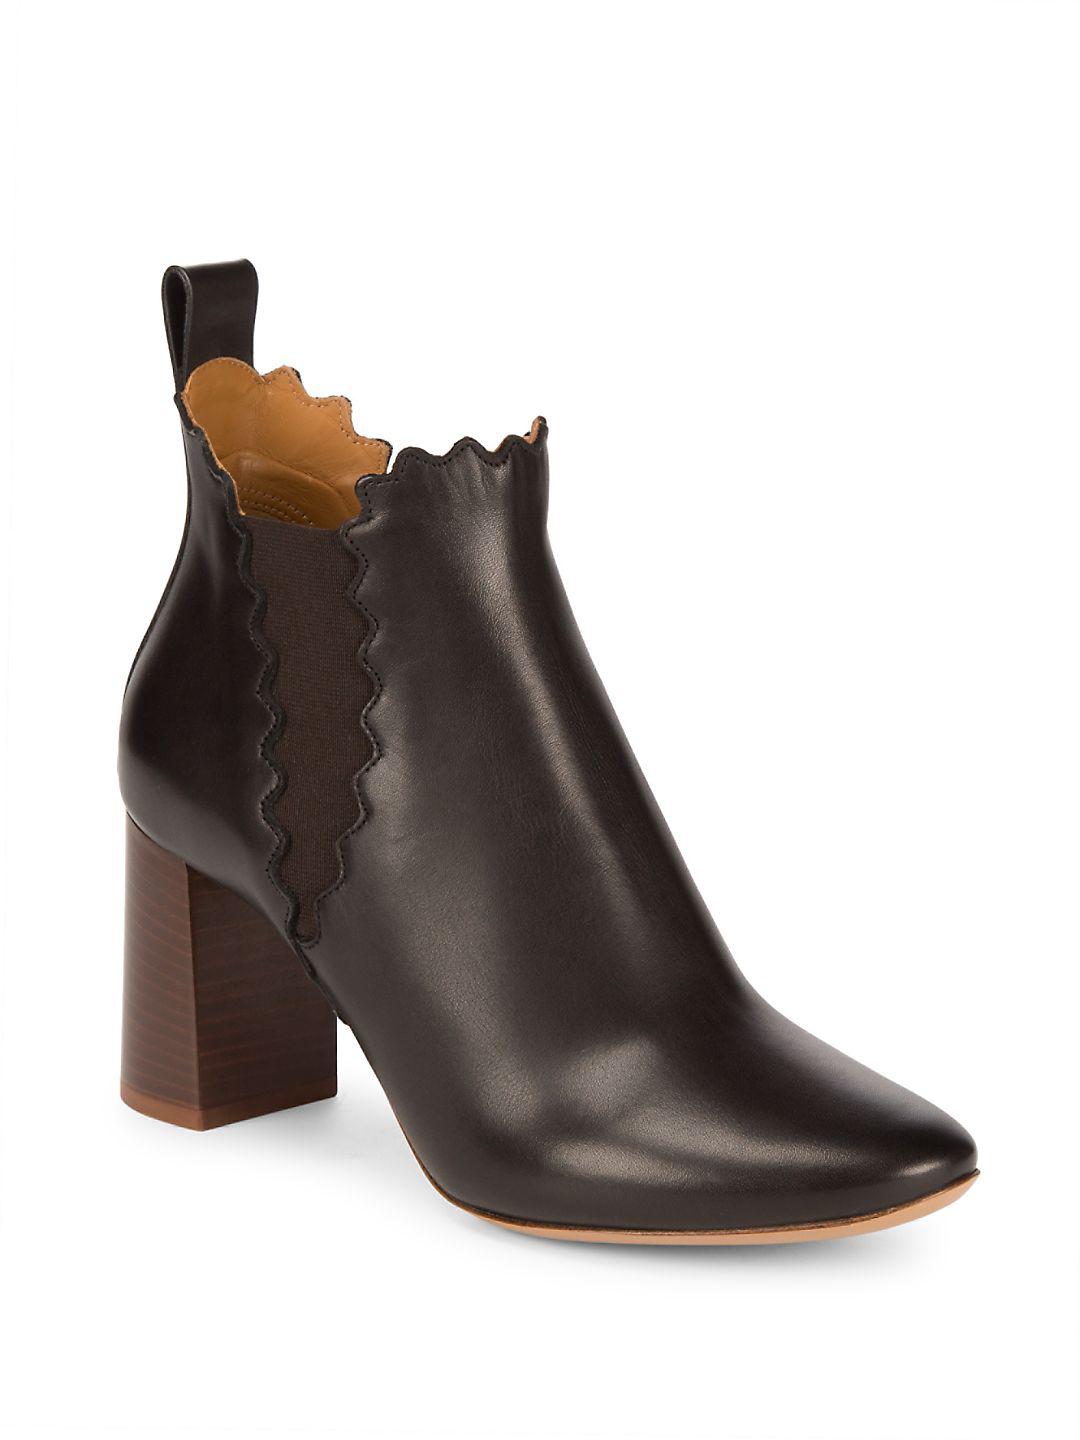 Chloé Lauren Scallop Leather Ankle Boots in Black - Lyst